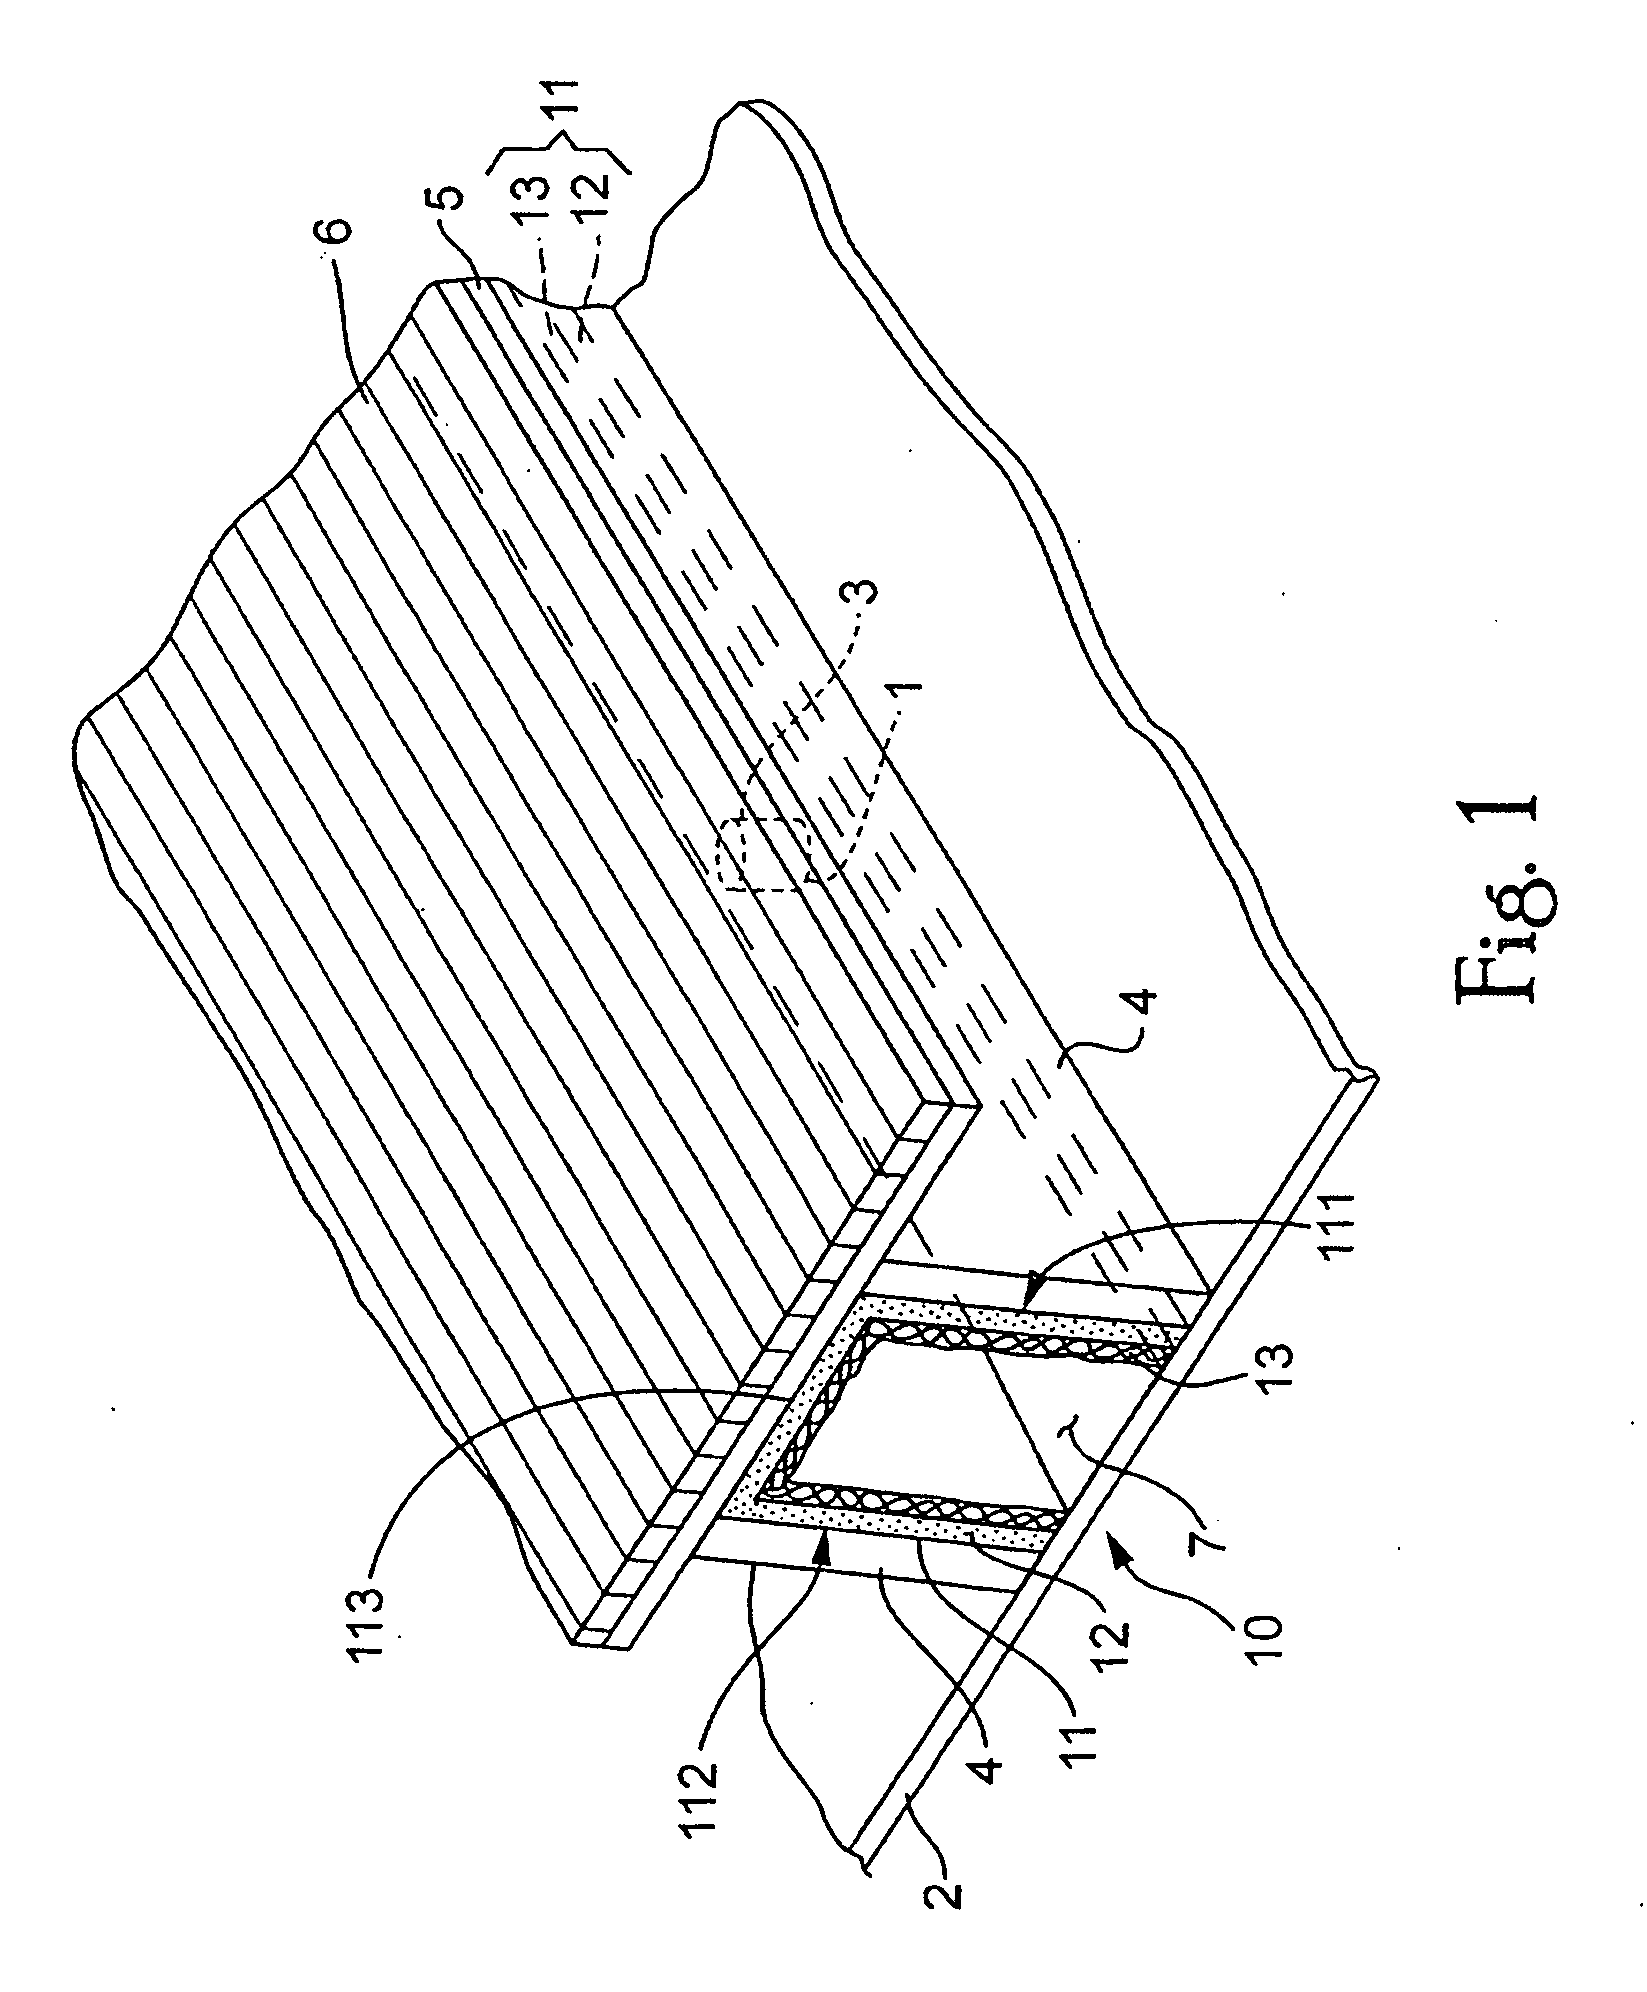 Perforation acoustic muffler assembly and method of reducing noise transmission through objects